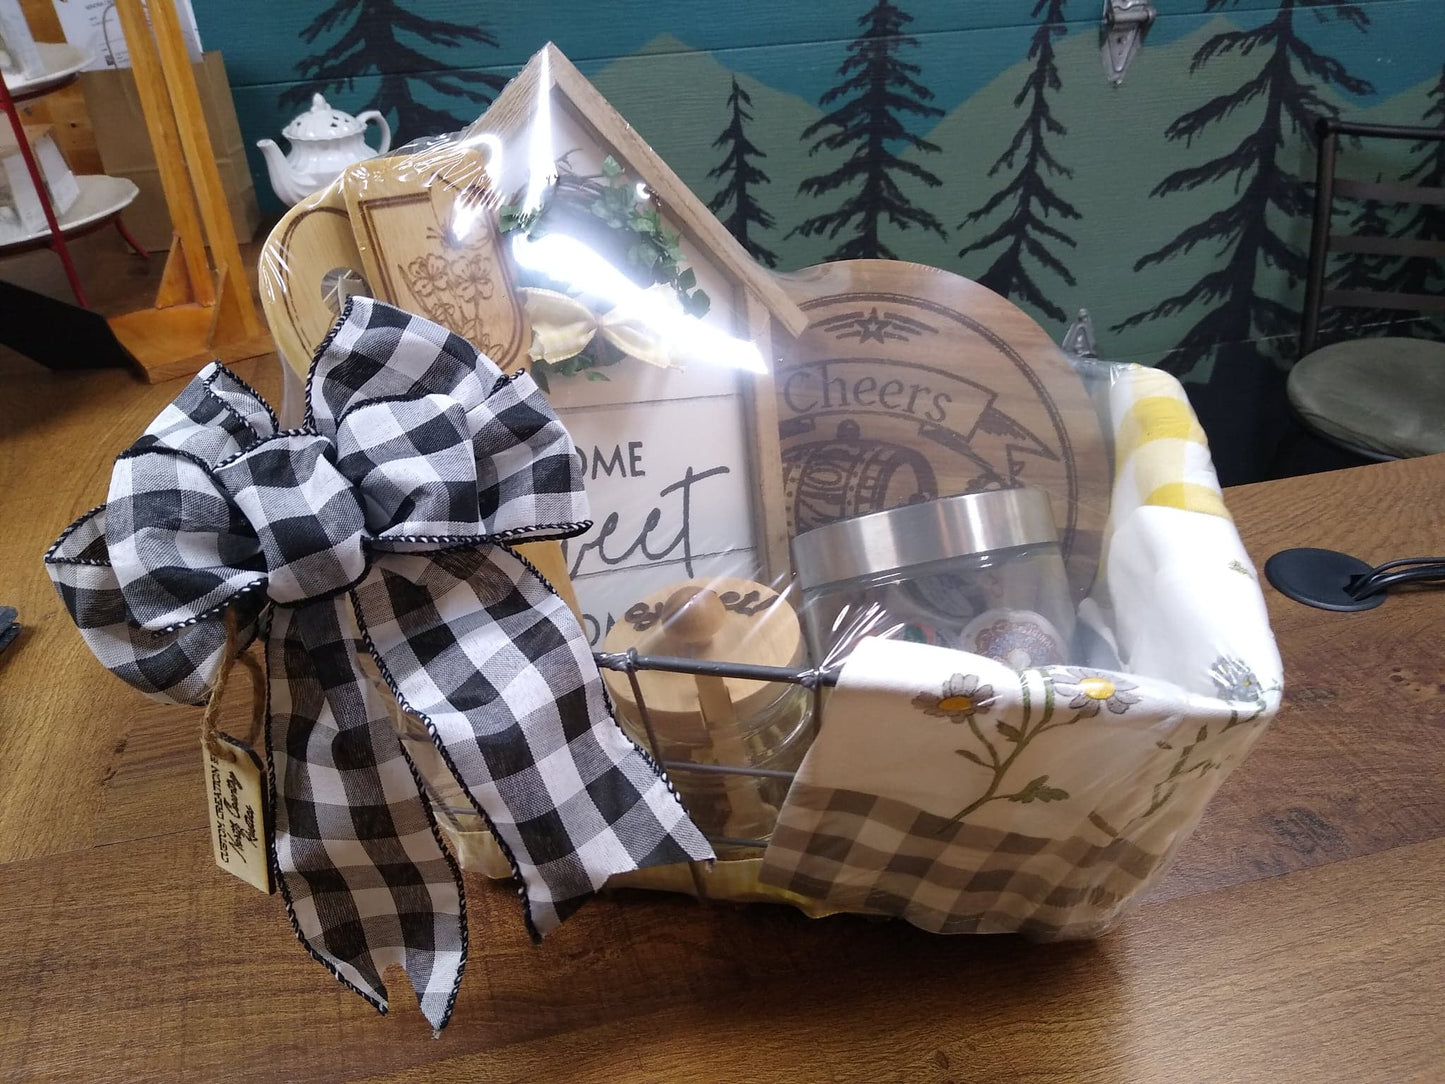 "Welcome Home" Gift Basket